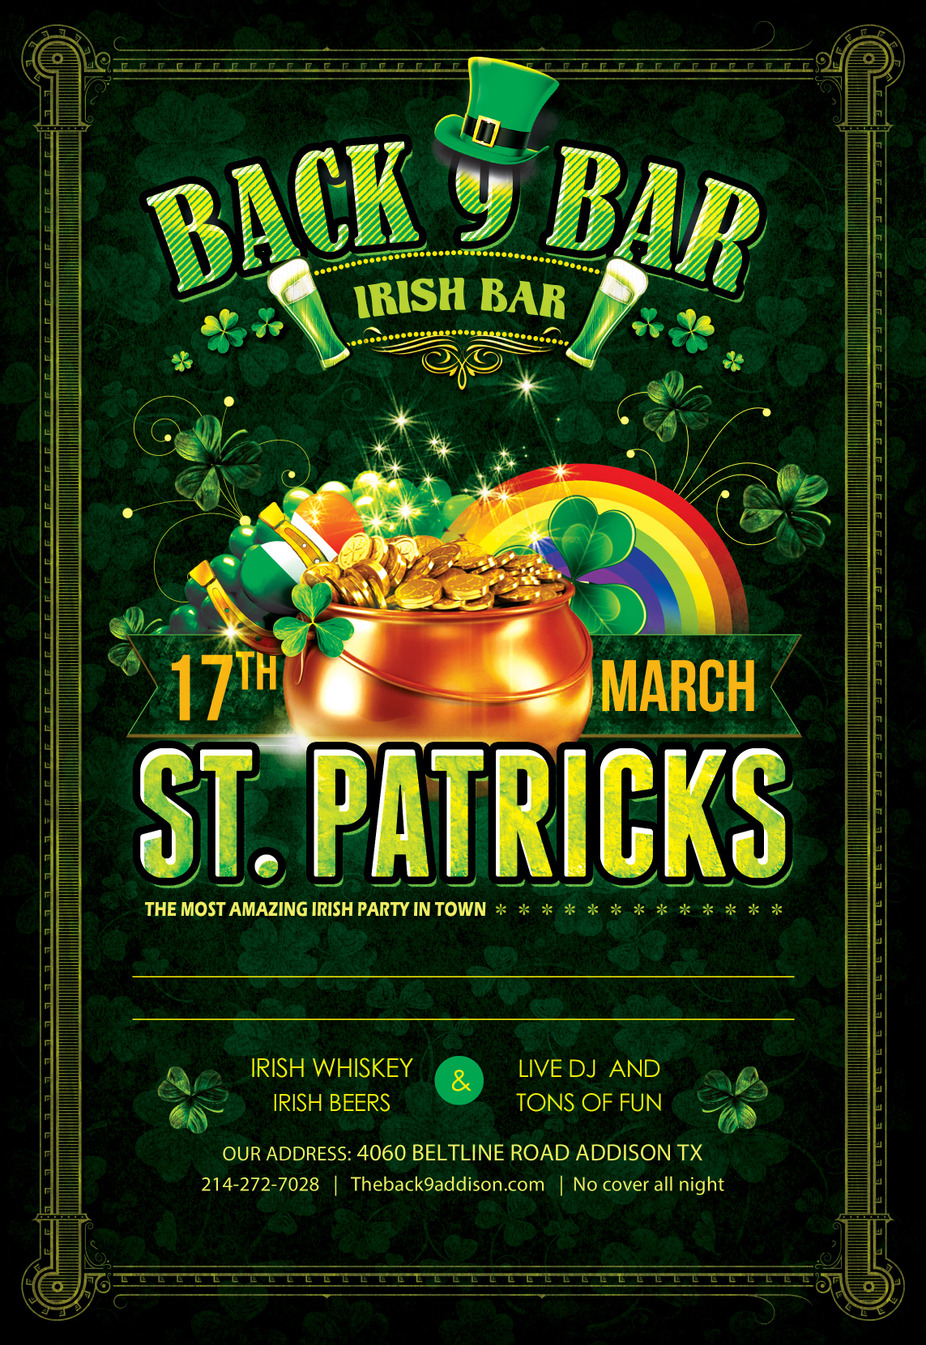 St. Patrick's Day event photo